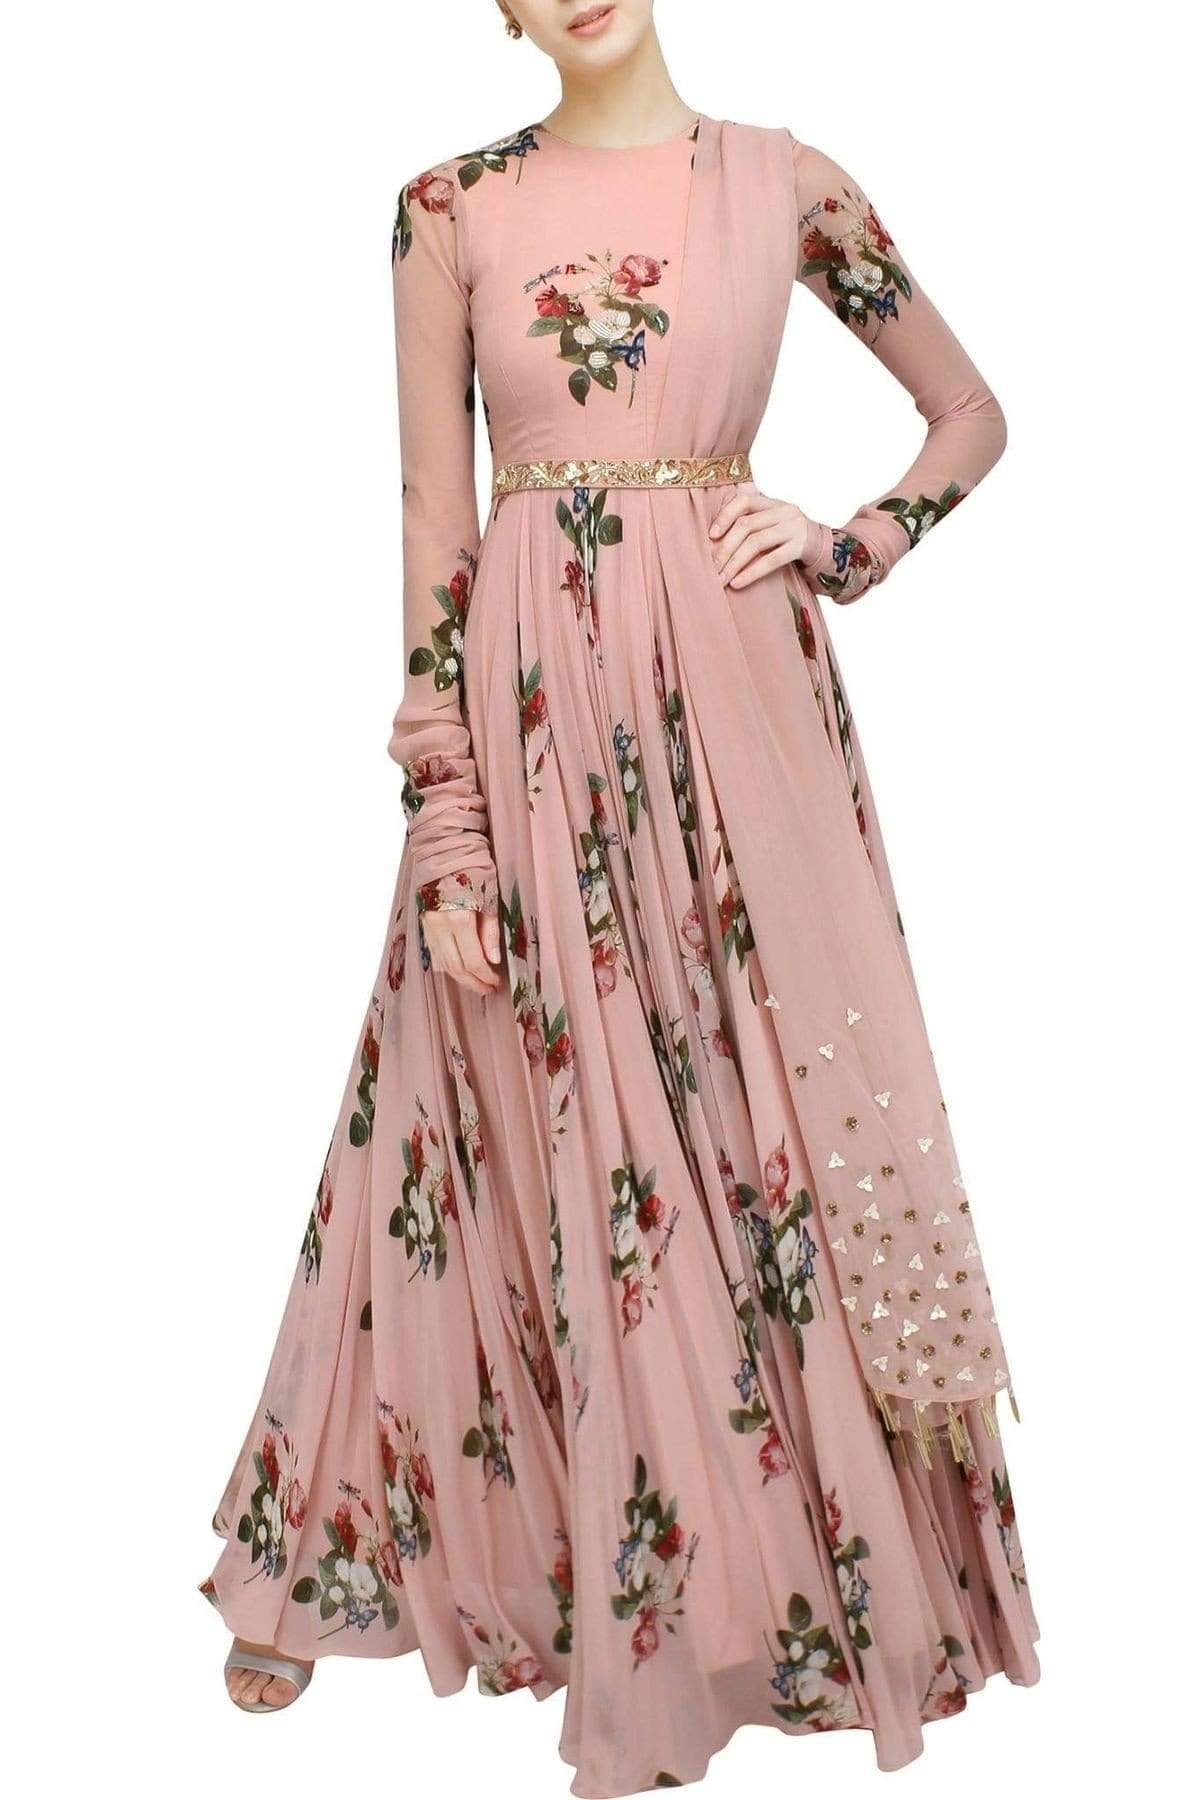 FunkyTradition Floral Peach Designer Wear Digital Floral Printed Gown - FunkyTradition